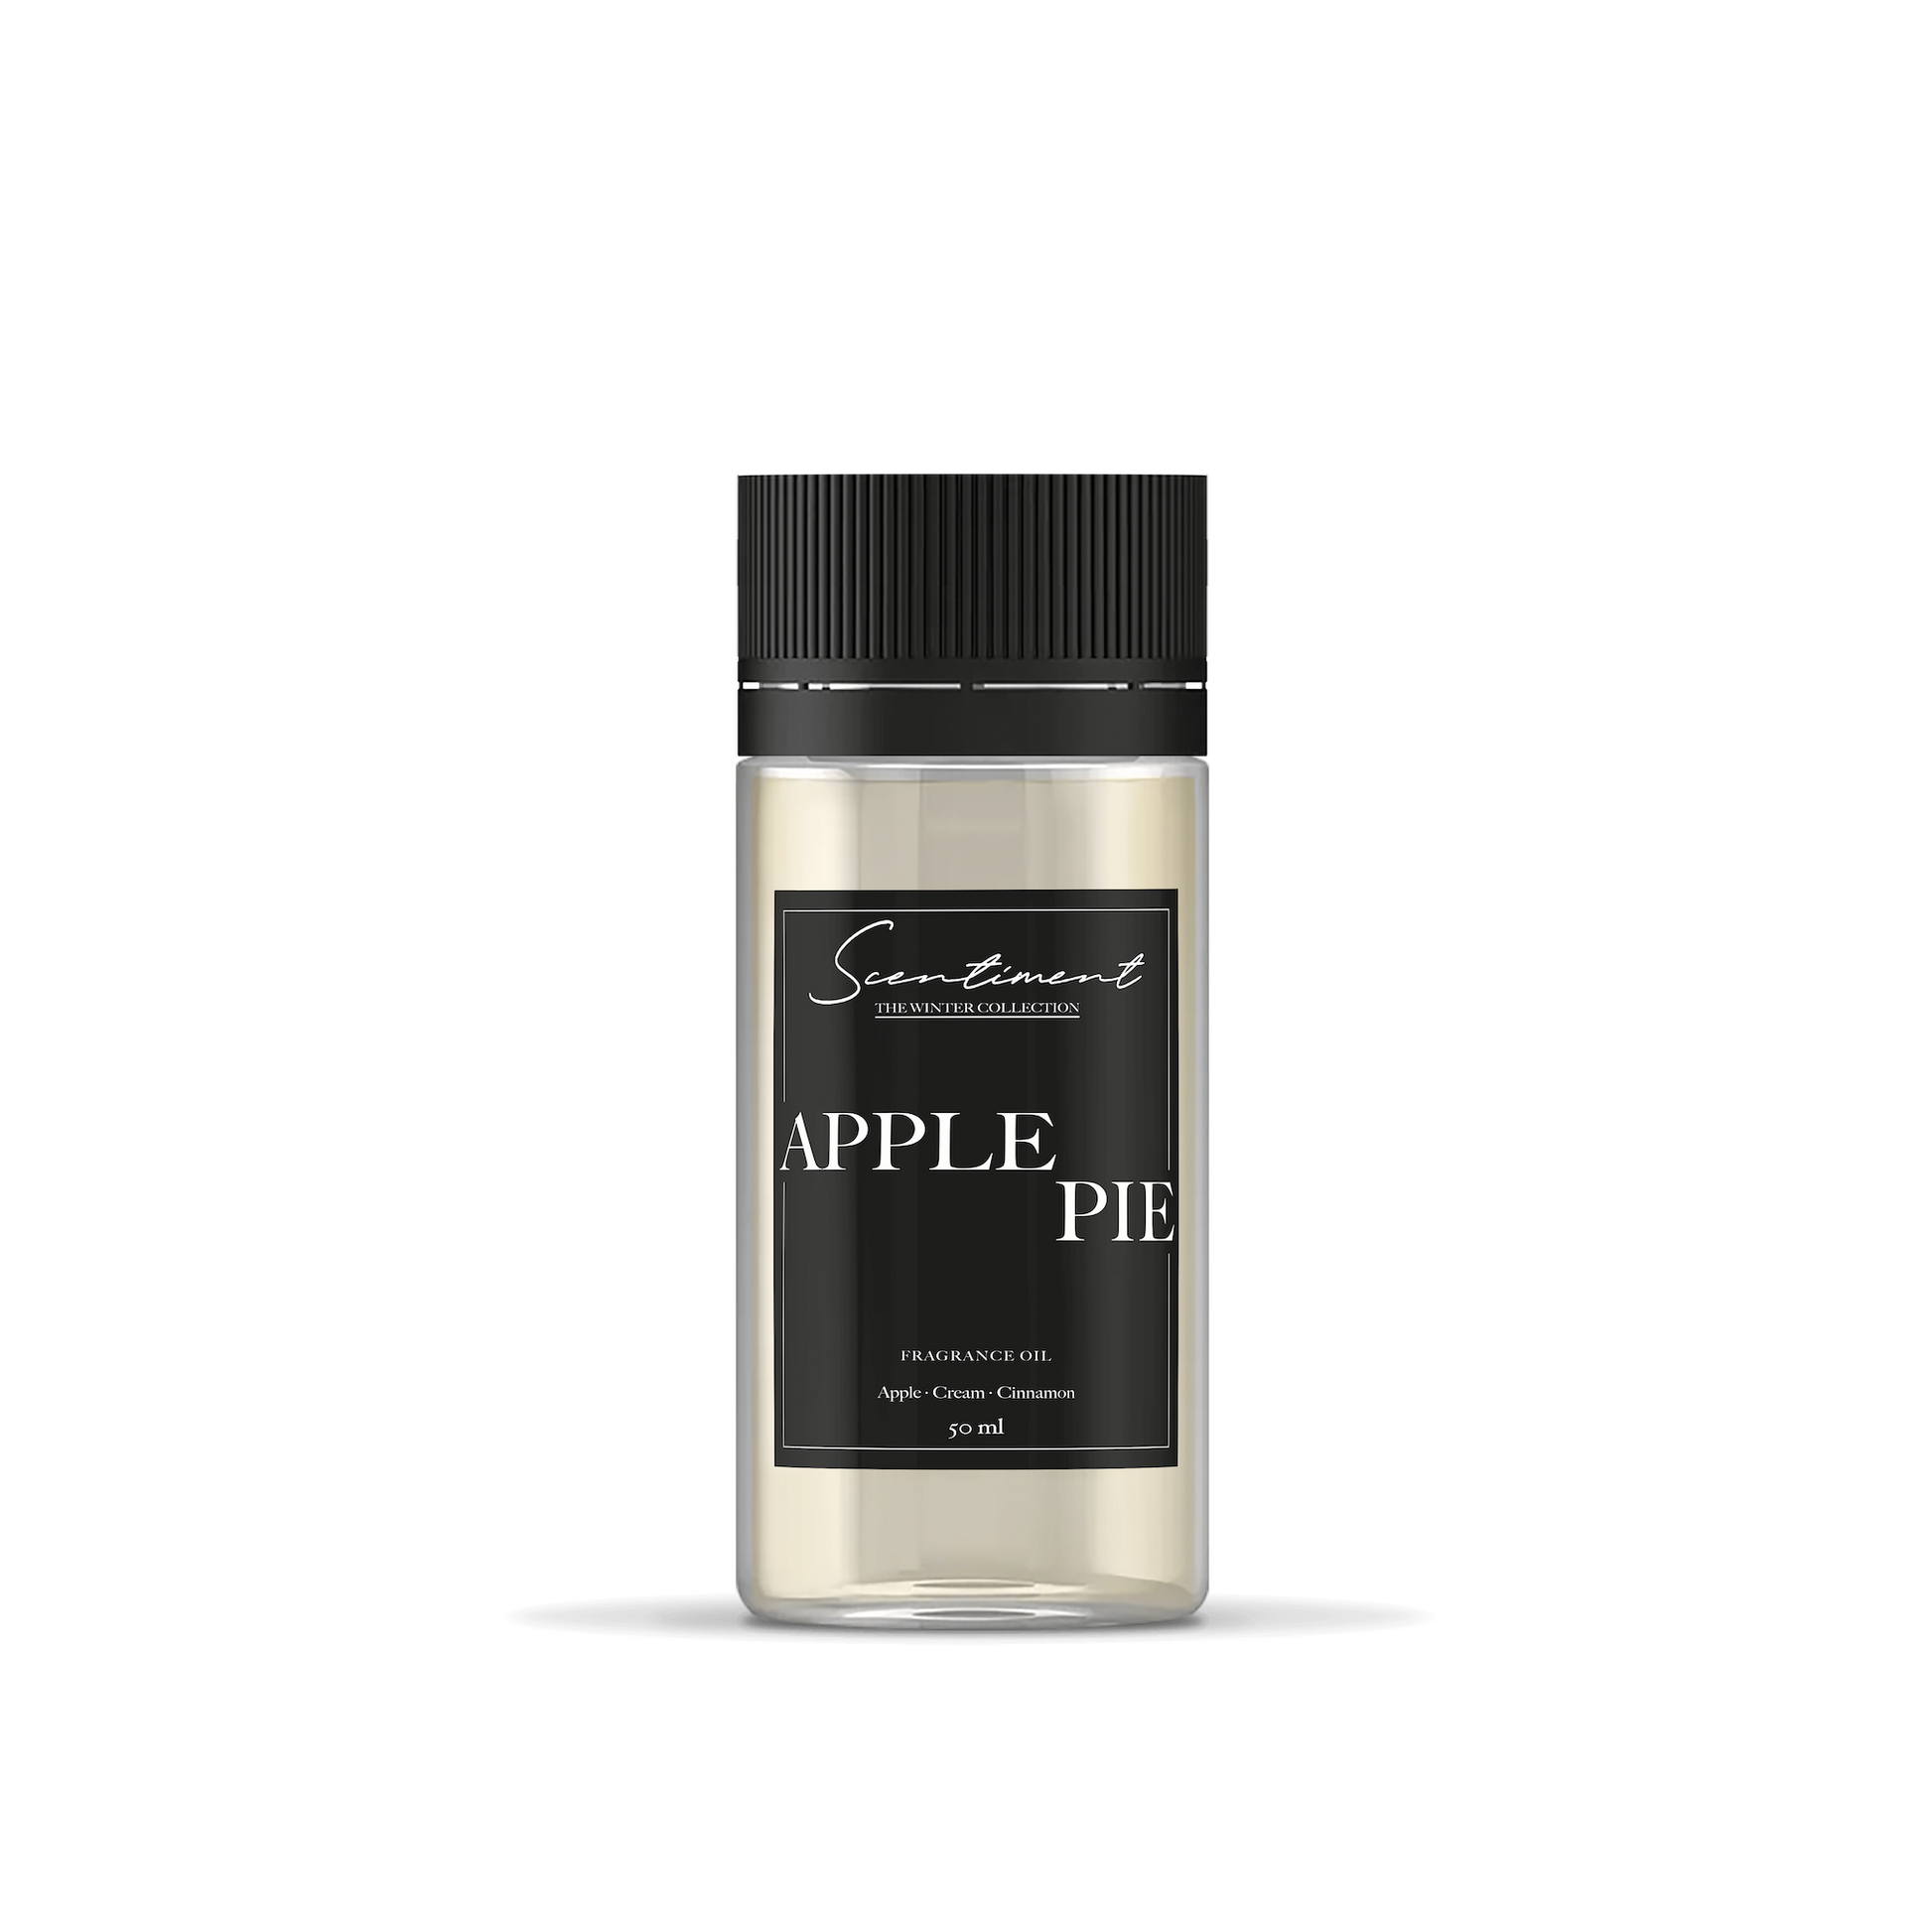 Apple Pie Fragrance Oil with notes of Apple, Cream, and Cinnamon.